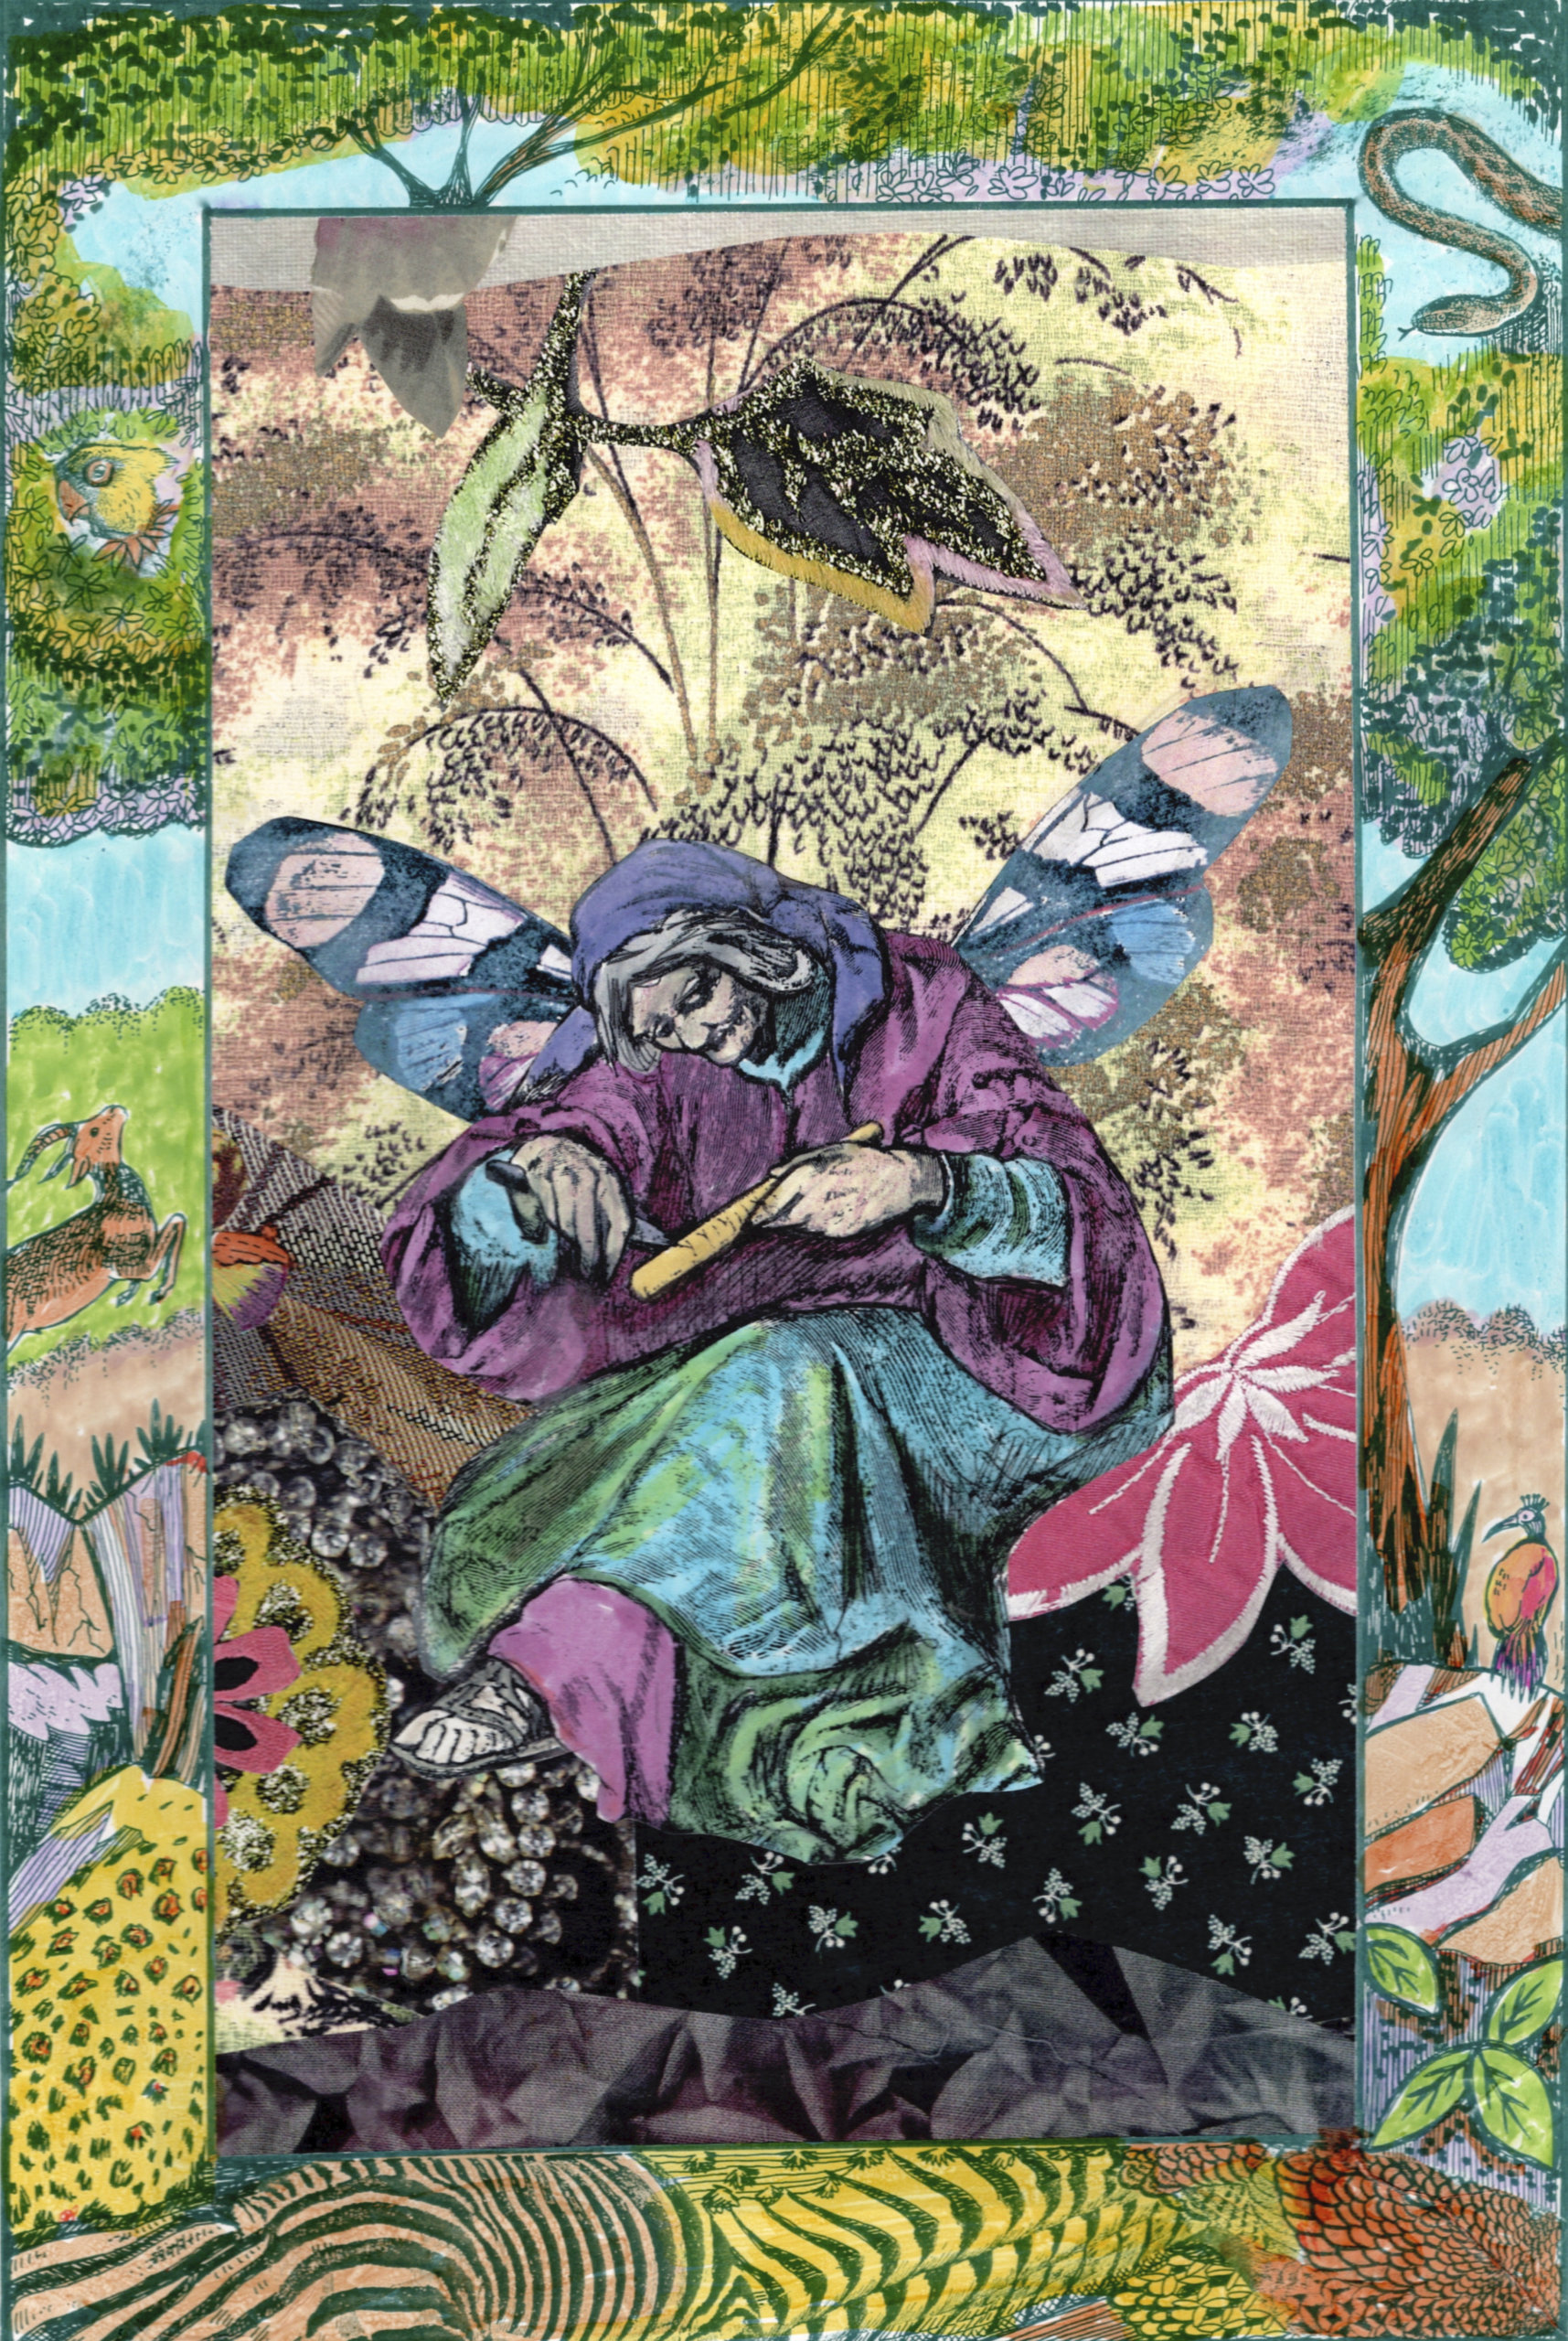 "The Mentor" tarot card from "The Intuition Oracle" by Amy Zerner